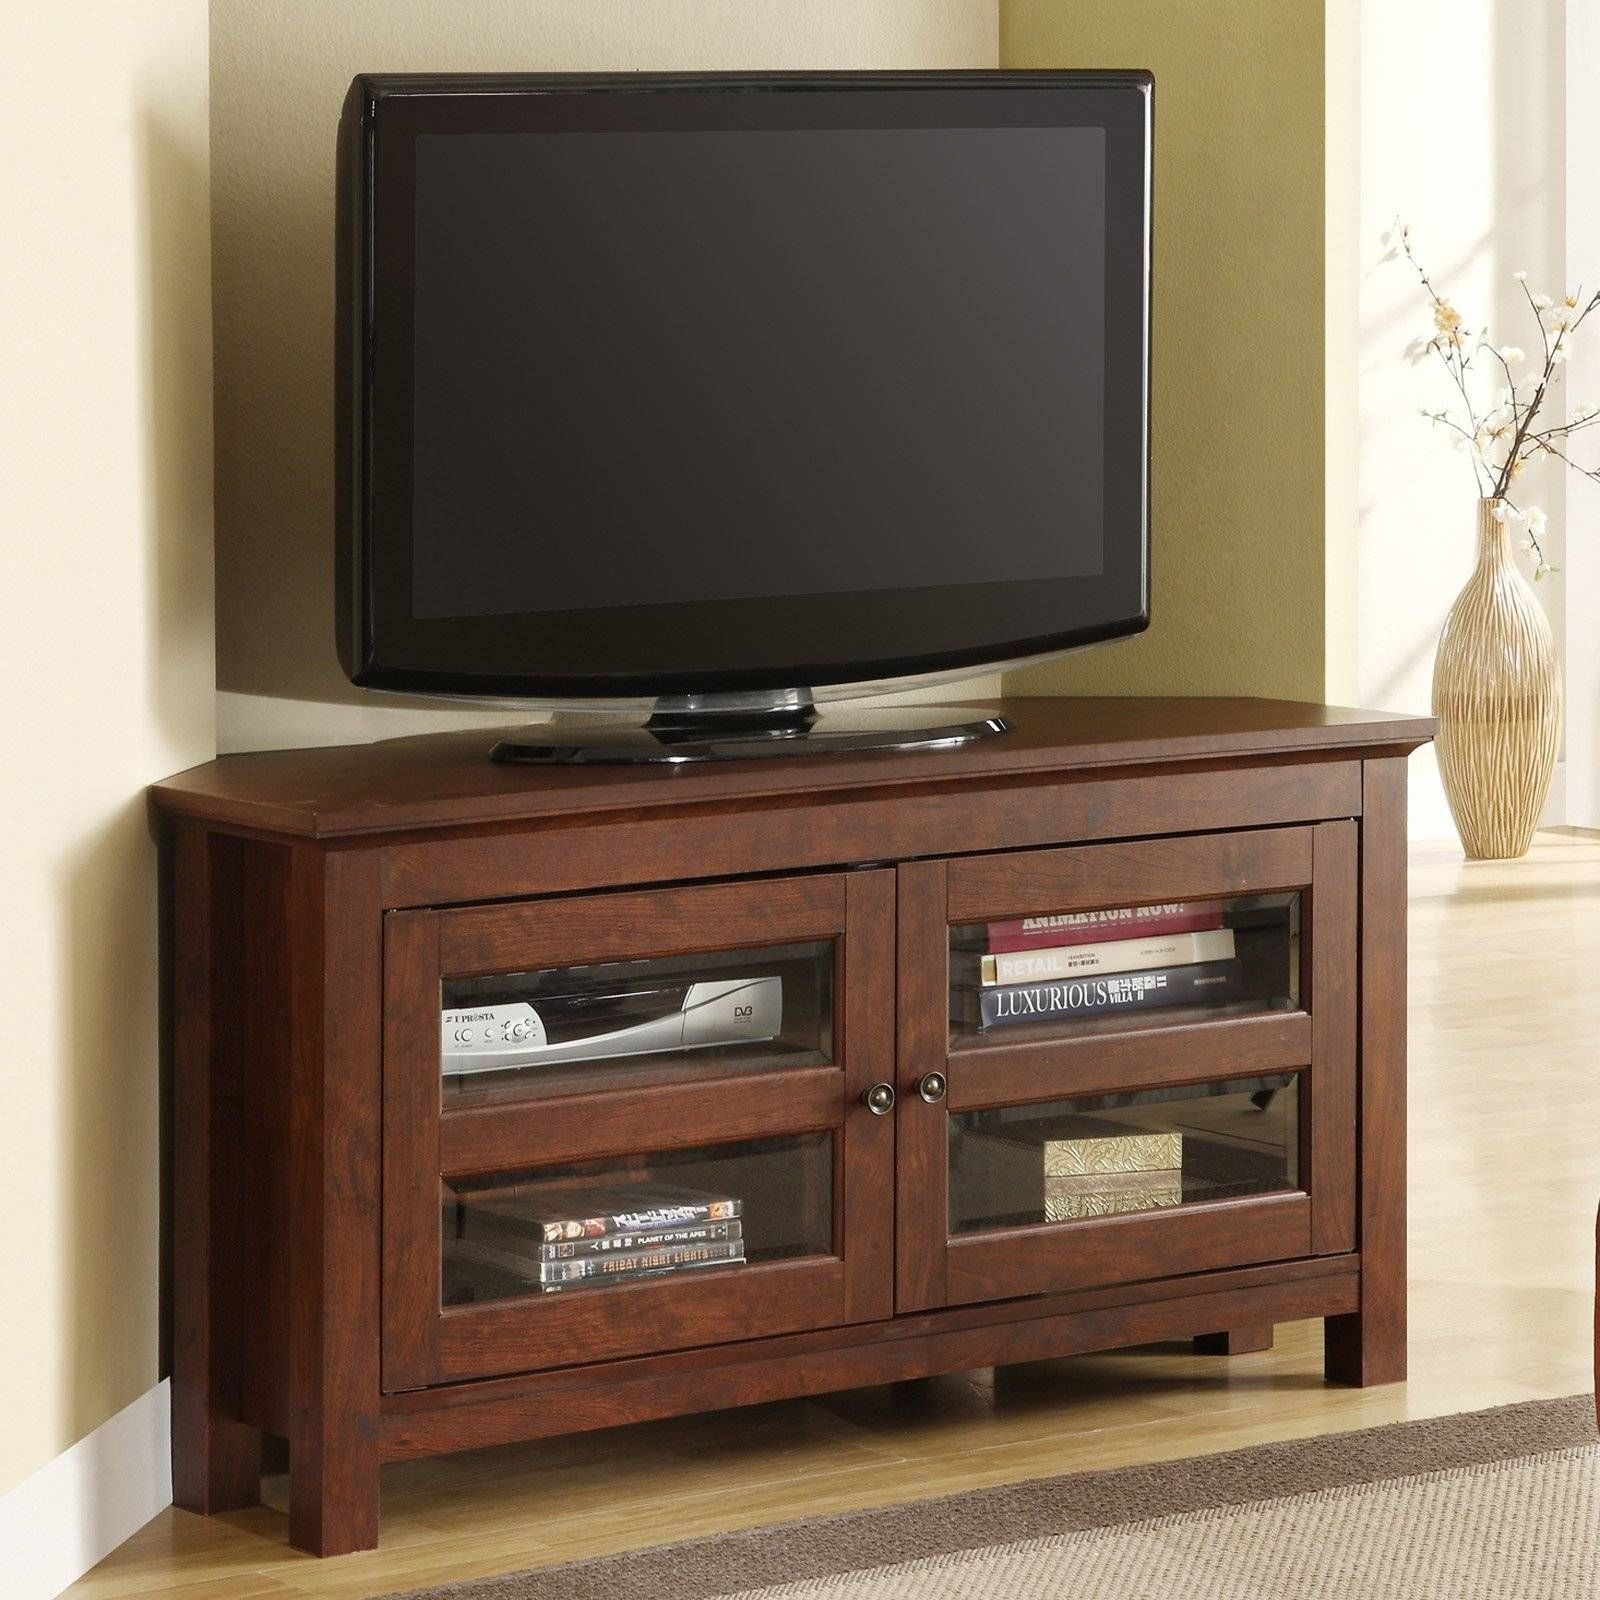 Modest Glass Wood Enclosed Tv Cabinets For Flat Screens With Doors In Enclosed Tv Cabinets For Flat Screens With Doors (View 13 of 15)